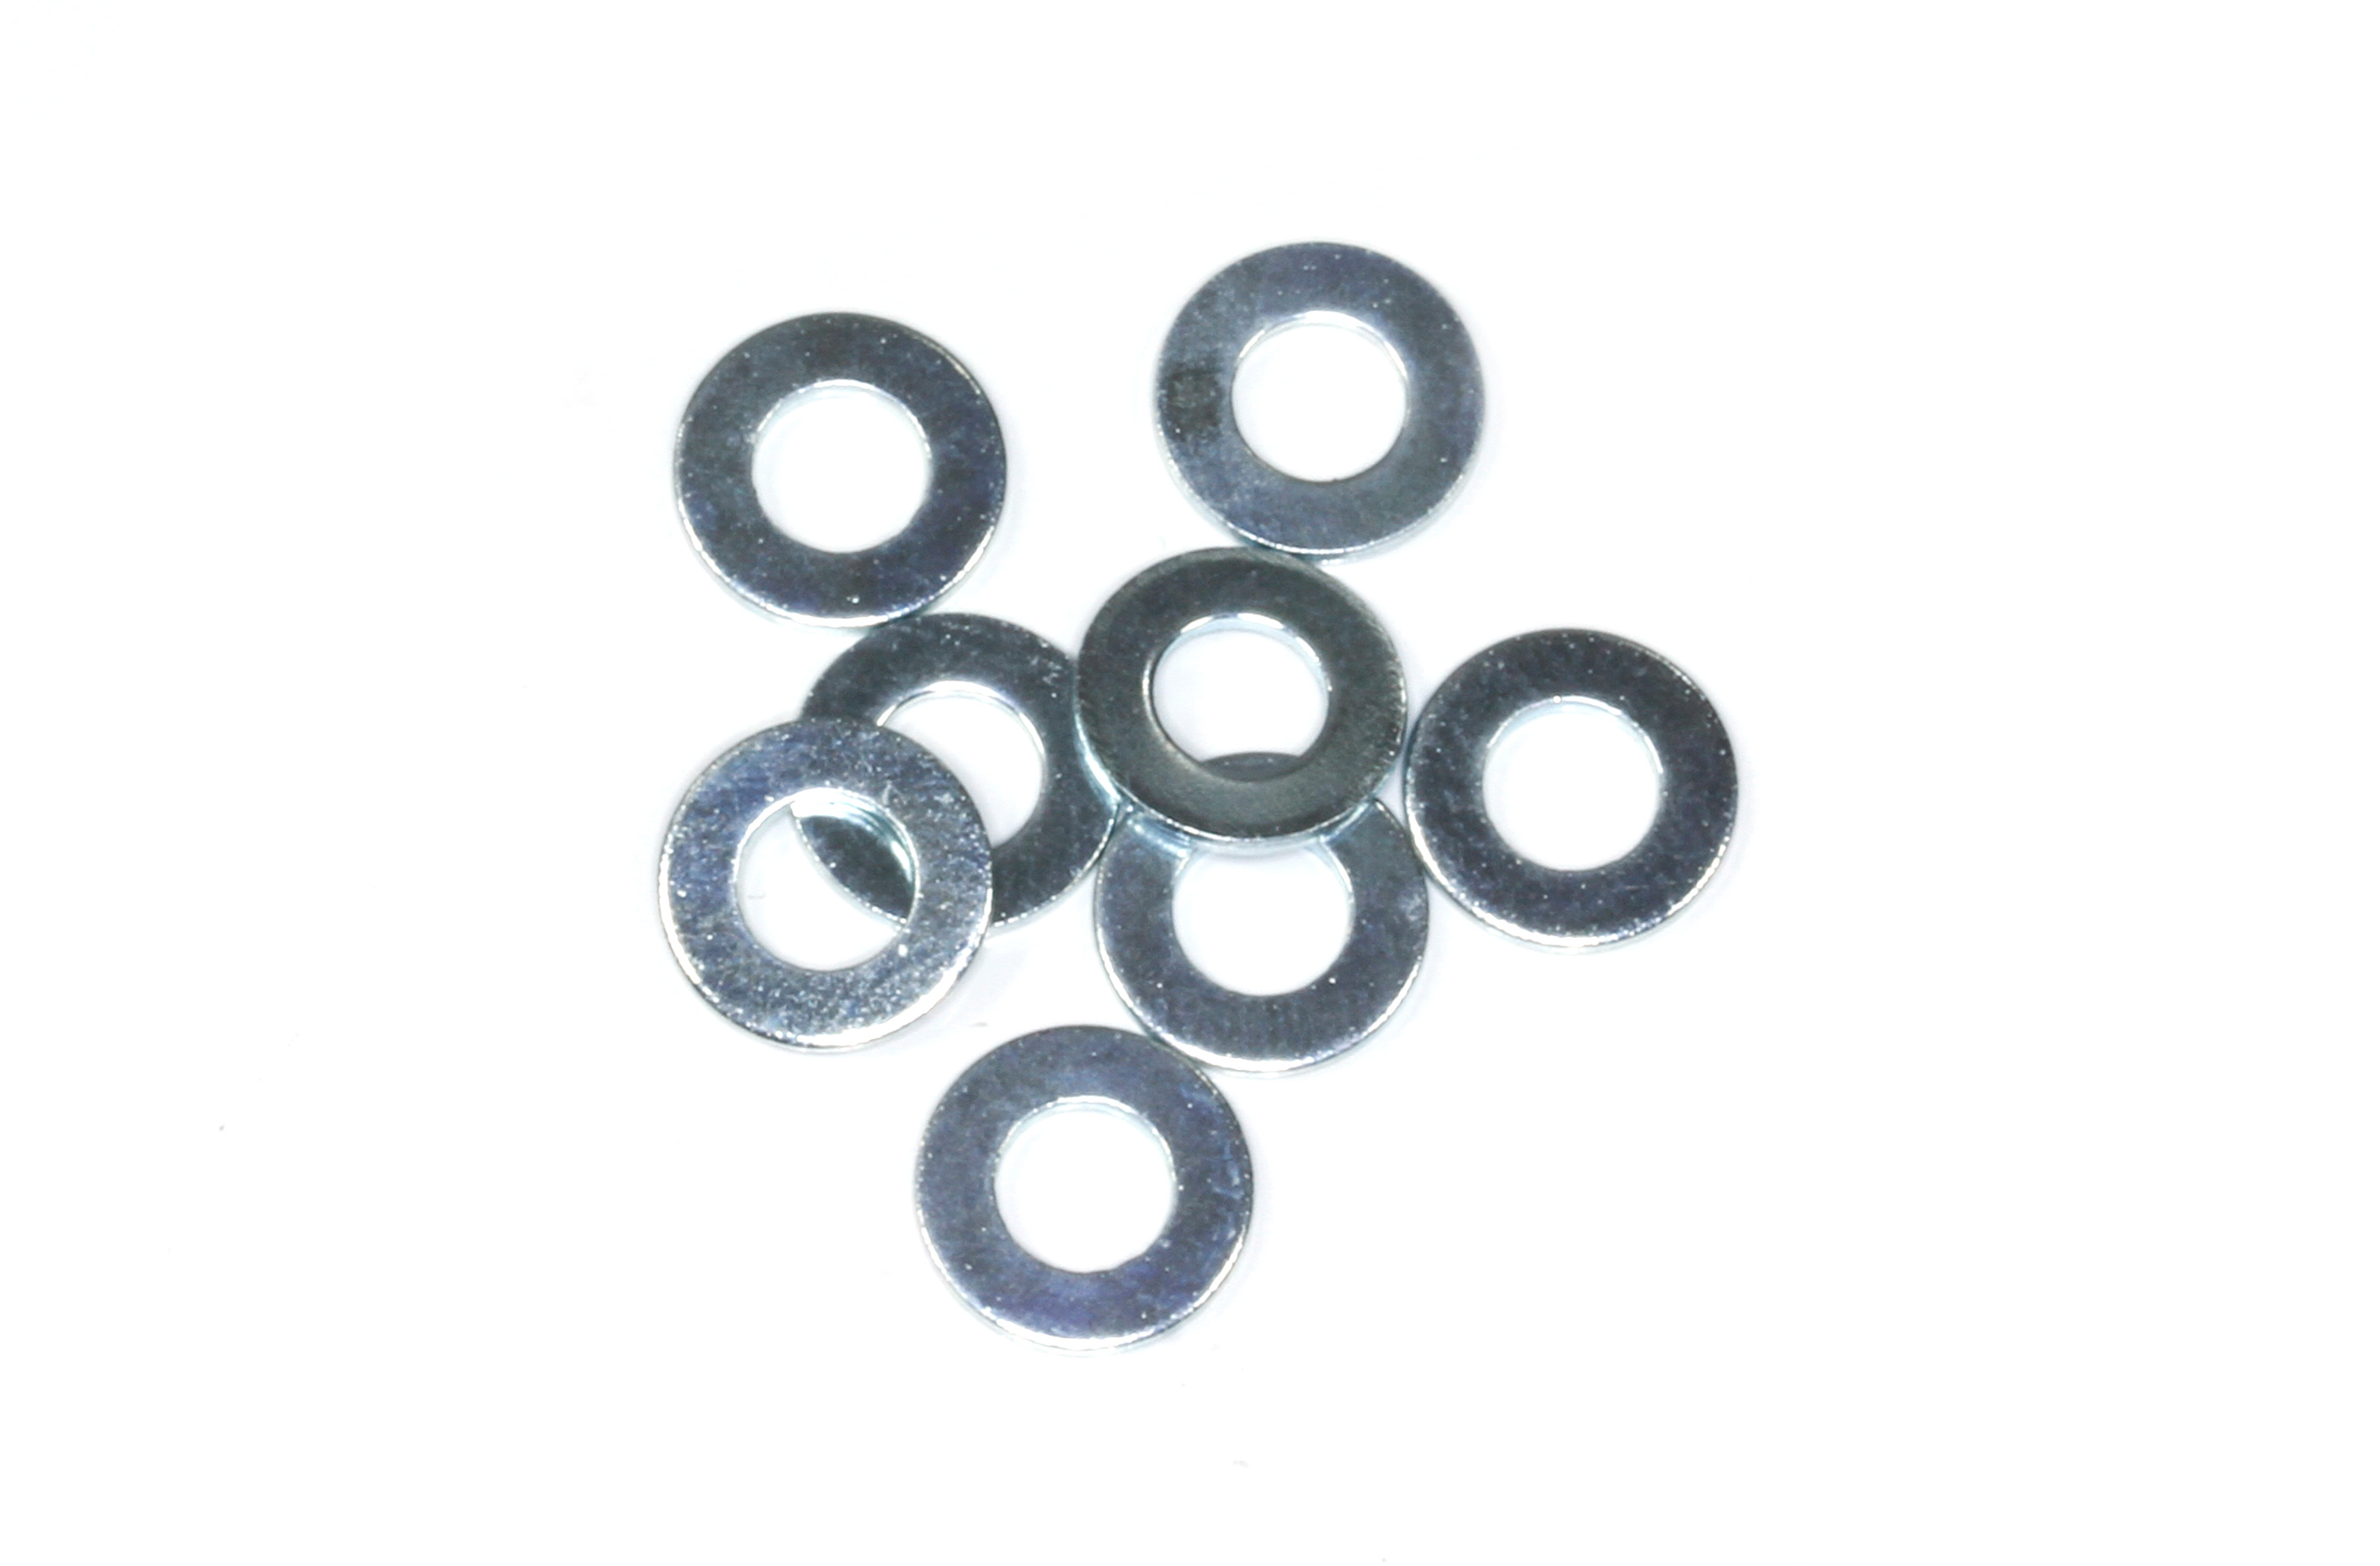 2012-67 Mecatech Washer for Pivot Steearing